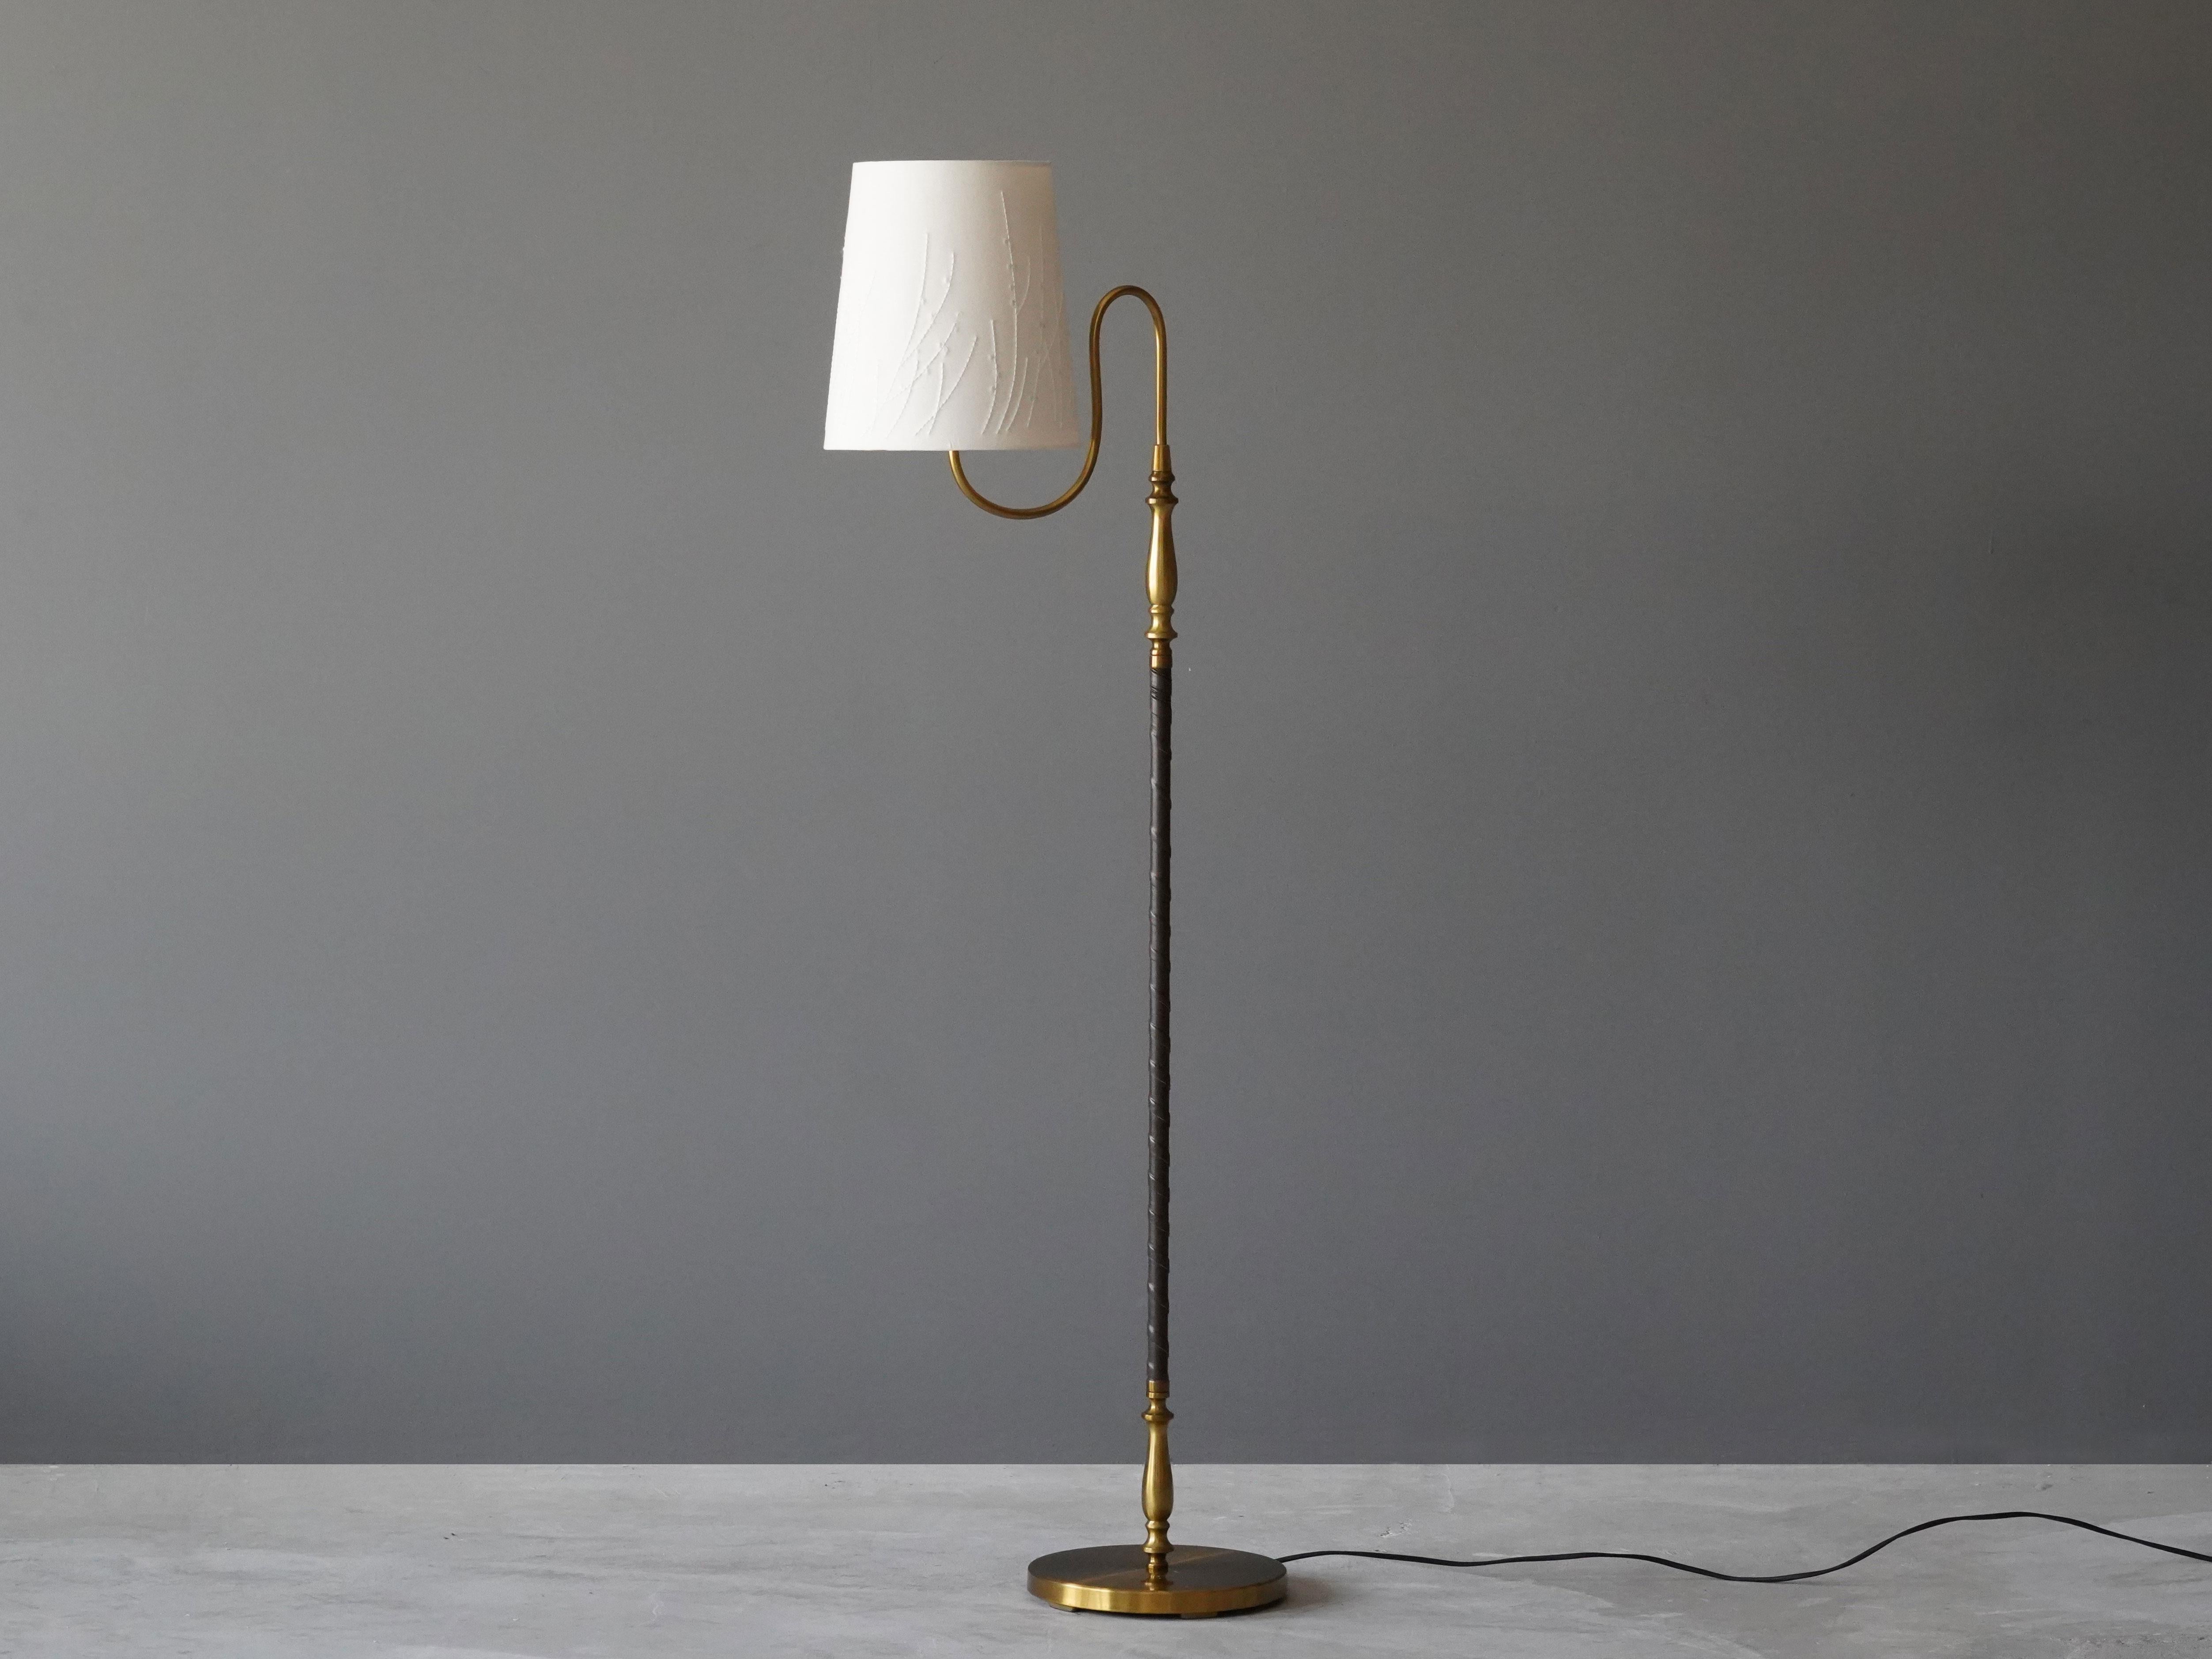 A rare adjustable floor lamp with an organic arm.

Fabric screen with handstitched detail, brass and original dark brown leather. 

Other designers of the period include Paavo Tynell, Josef Frank, Carl-Axel Acking, Alvar Aalto, and Bertil